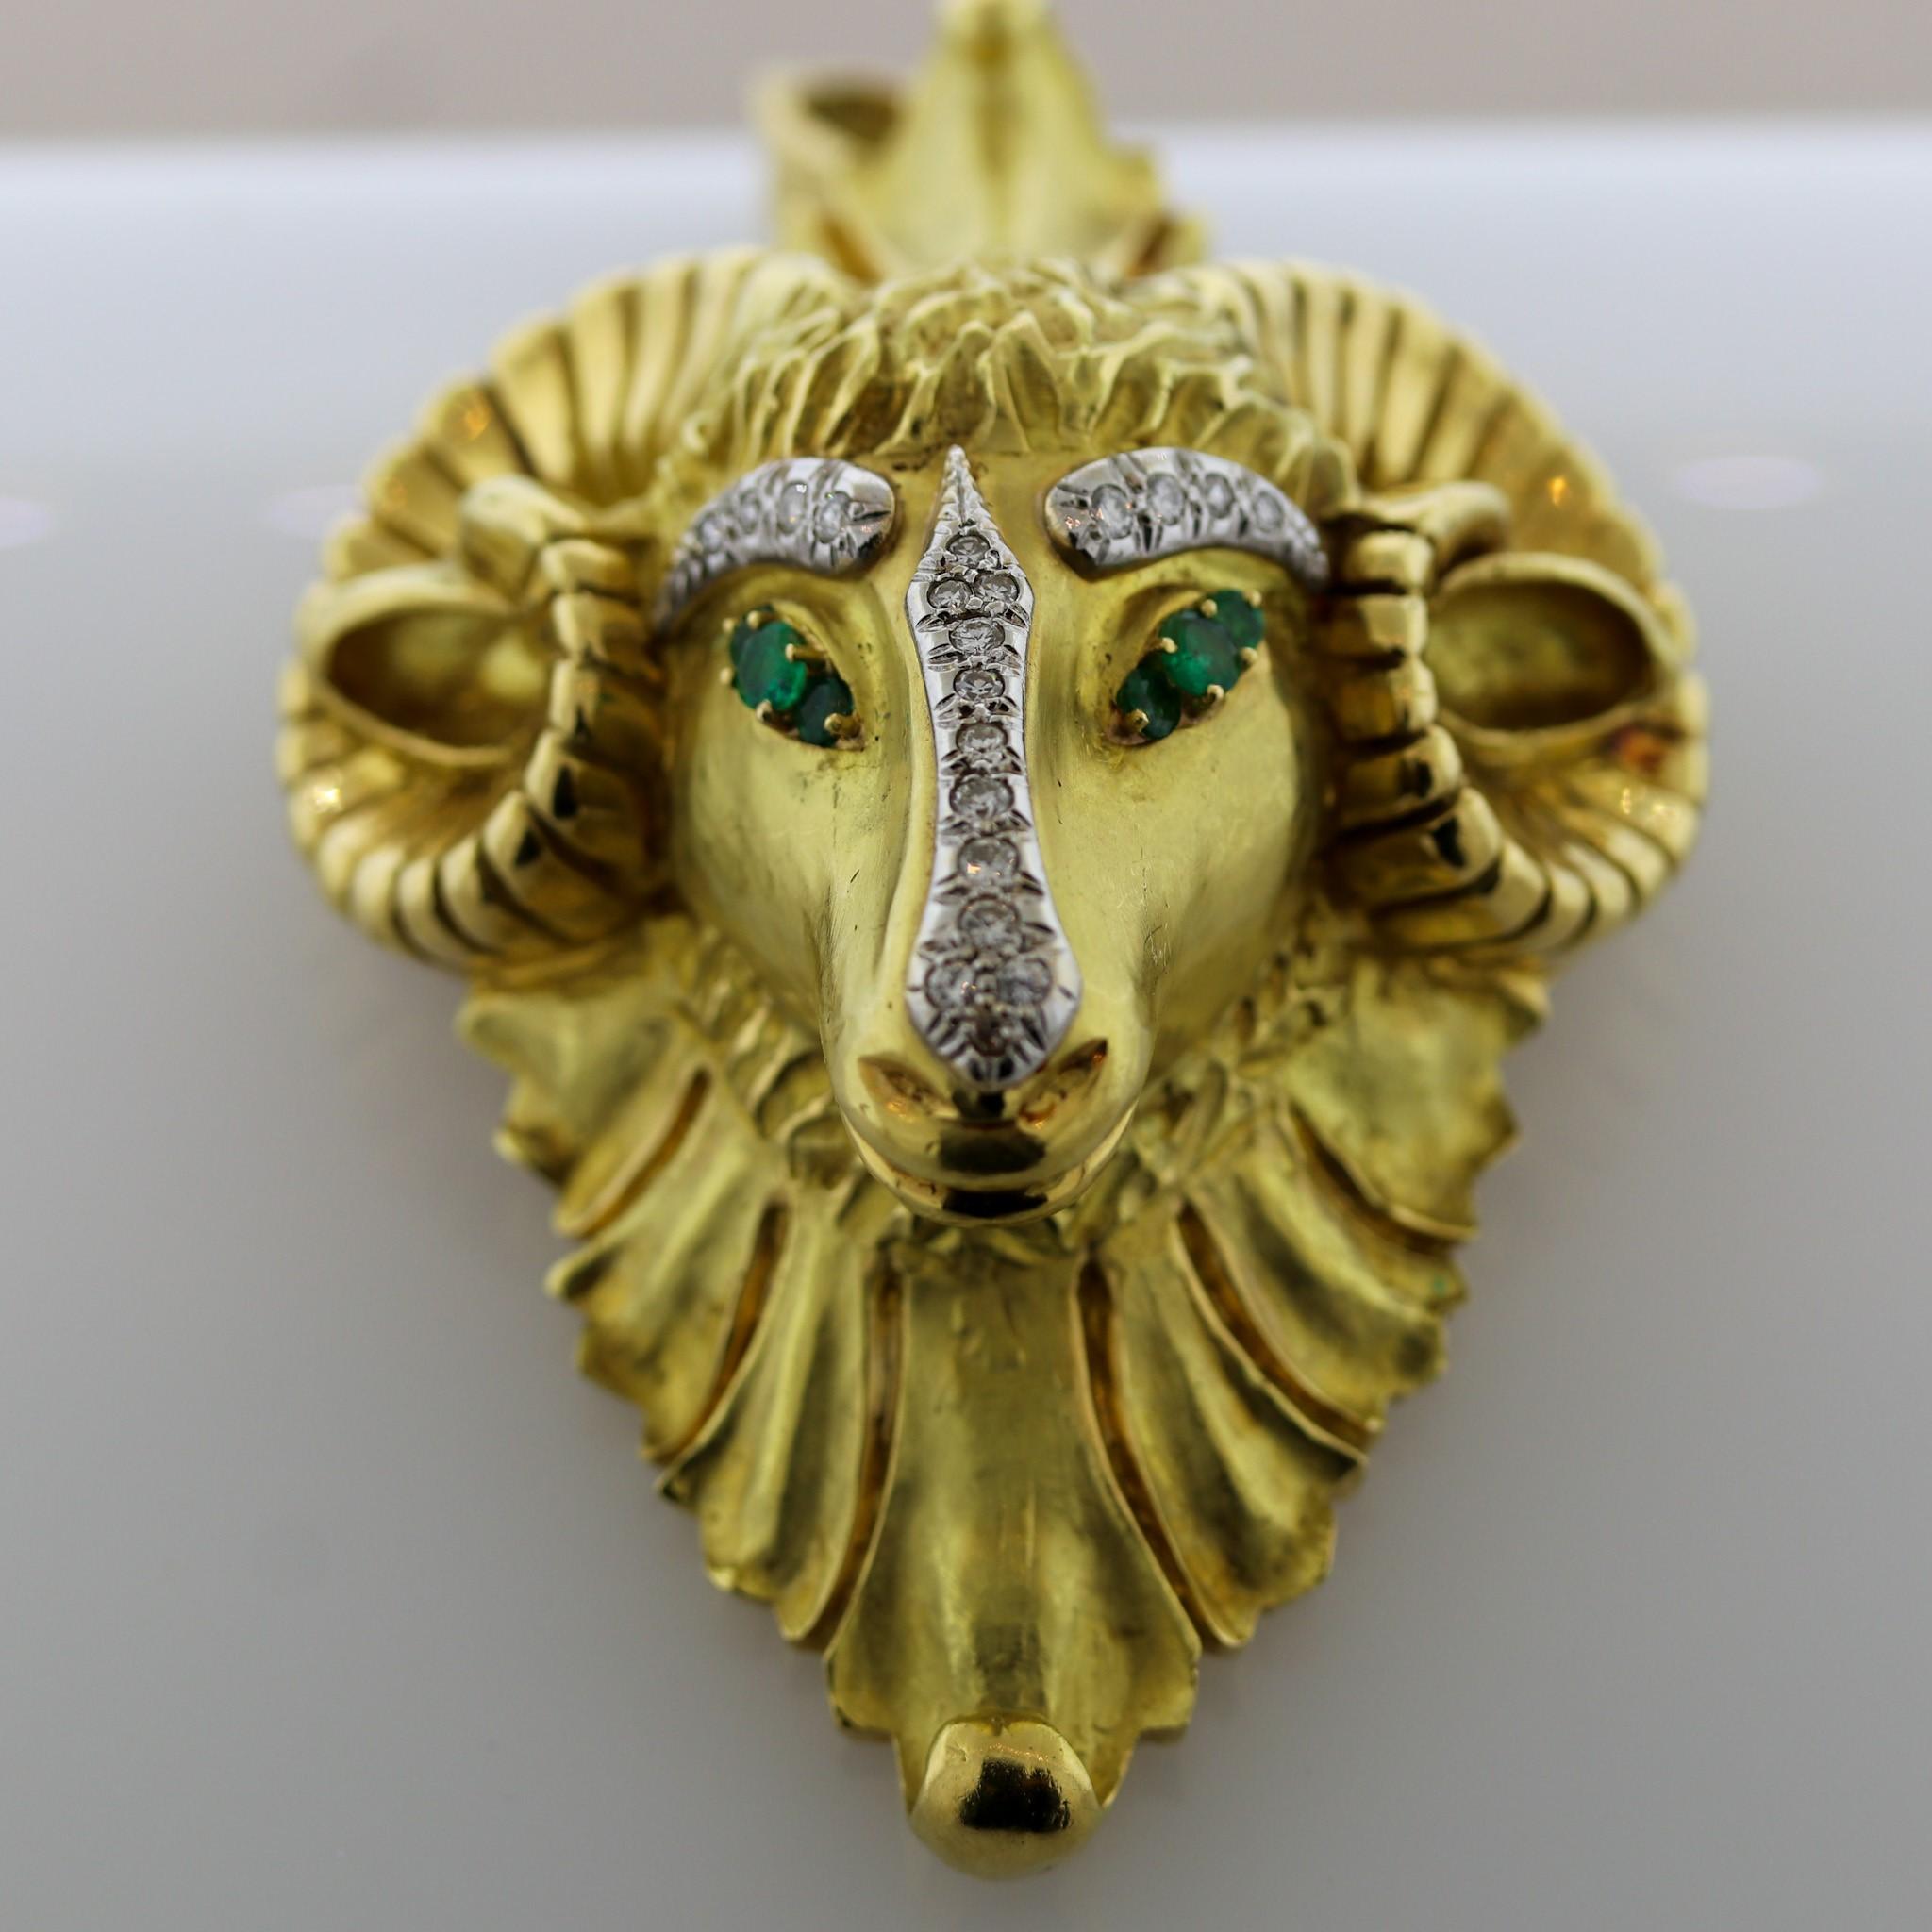 An original classic piece by Hammerman Brothers of a strong ram. It features round brilliant-cut diamonds set on its nose and eyebrows as well as 6 round emeralds as its mesmerizing eyes. Hand-sculpted and worked with excellent detail. Made in 18k